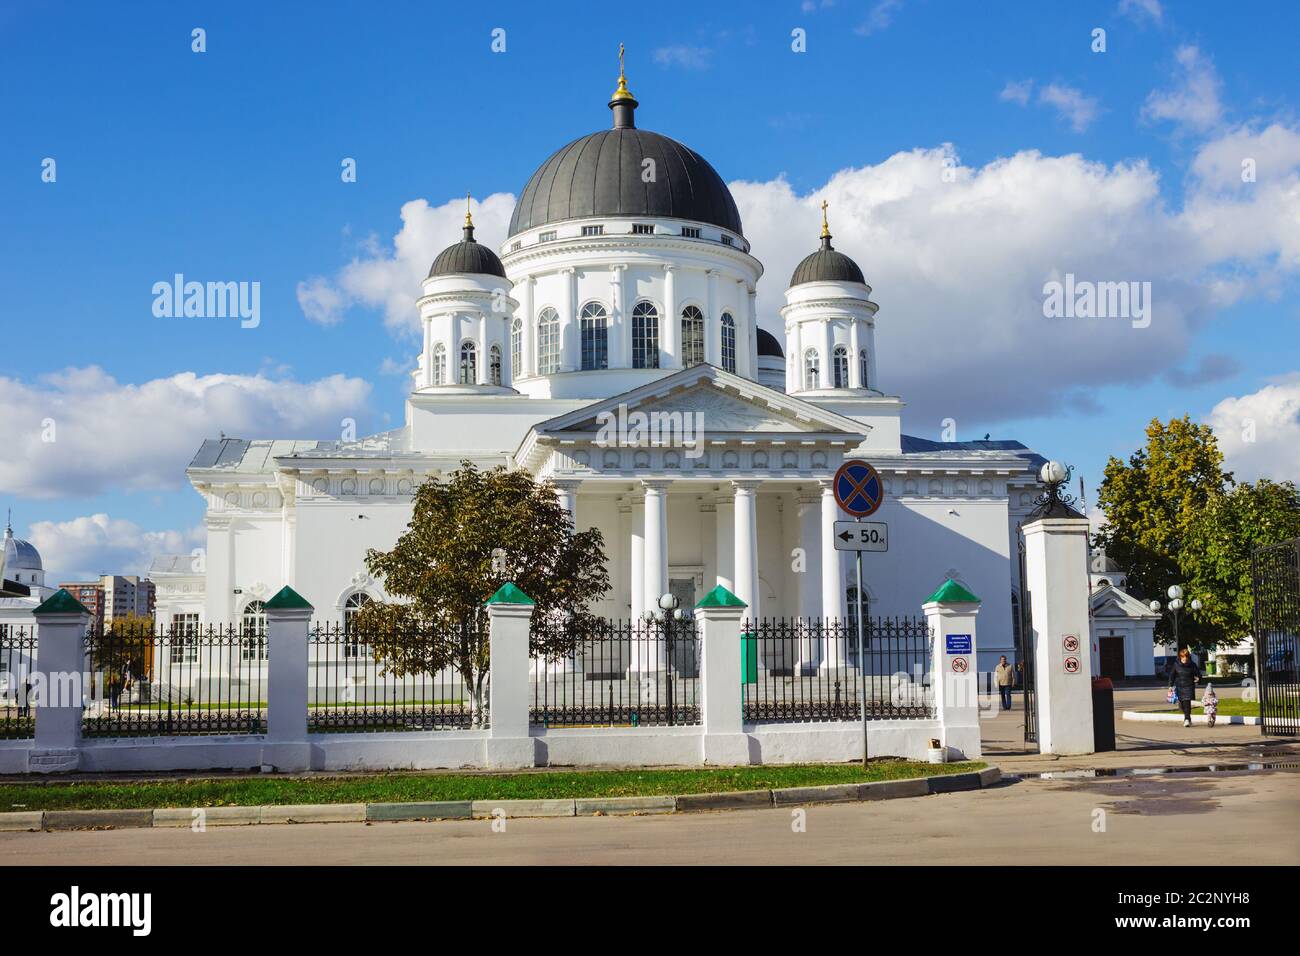 Temple in the style of late classicism, Nizhny Novgorod Stock Photo